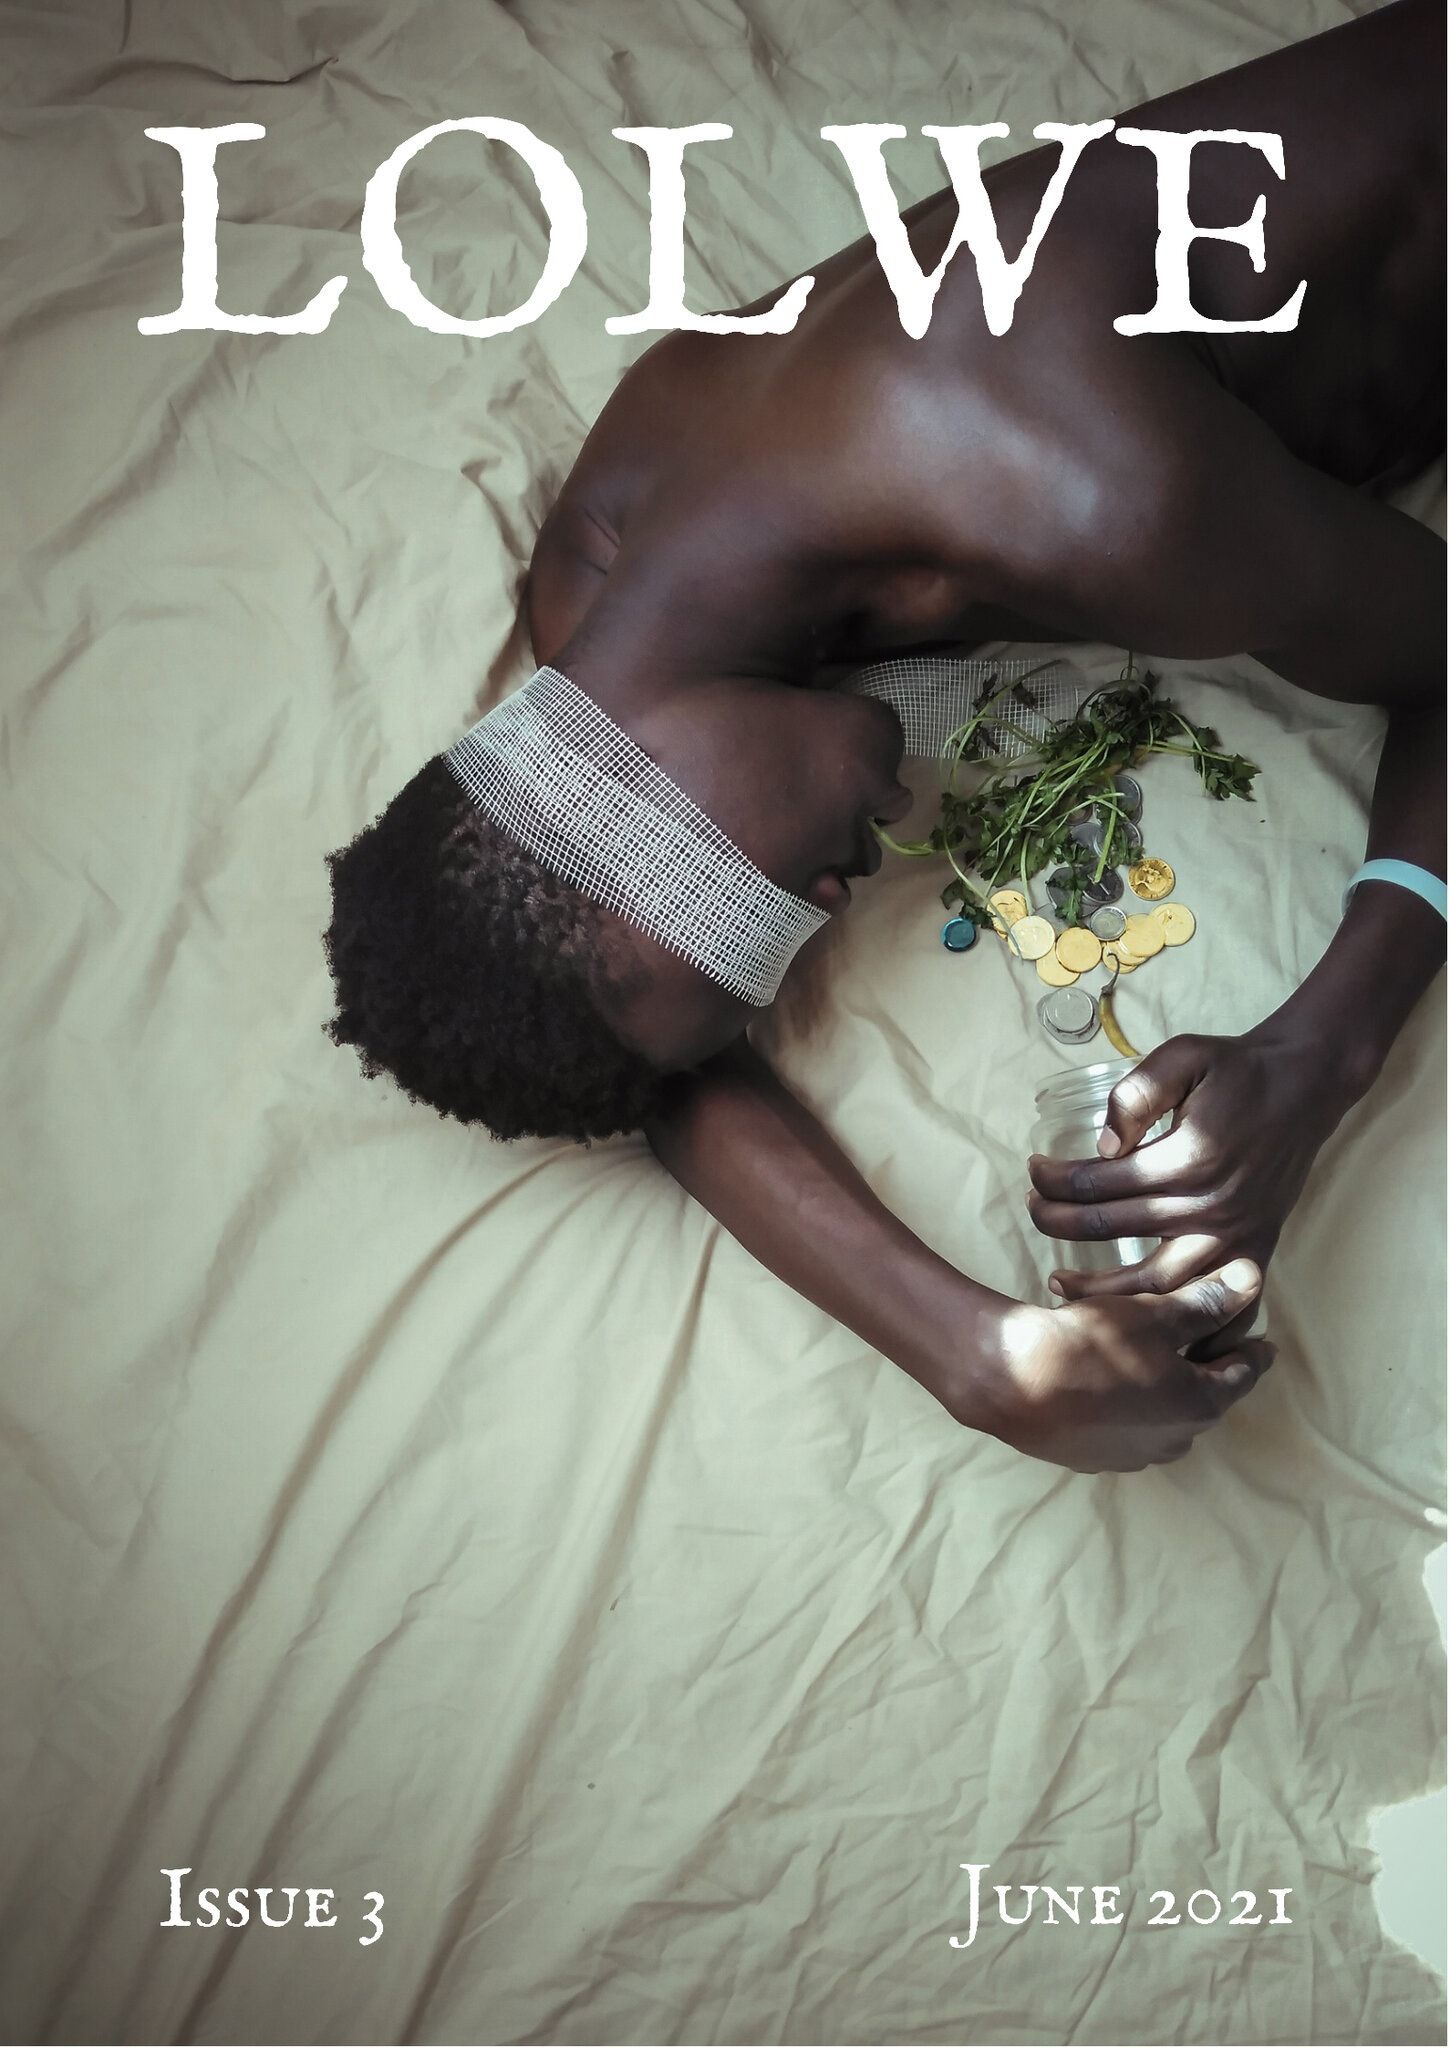 Image of the cover of Issue 3 of the online literary journal Lolwe